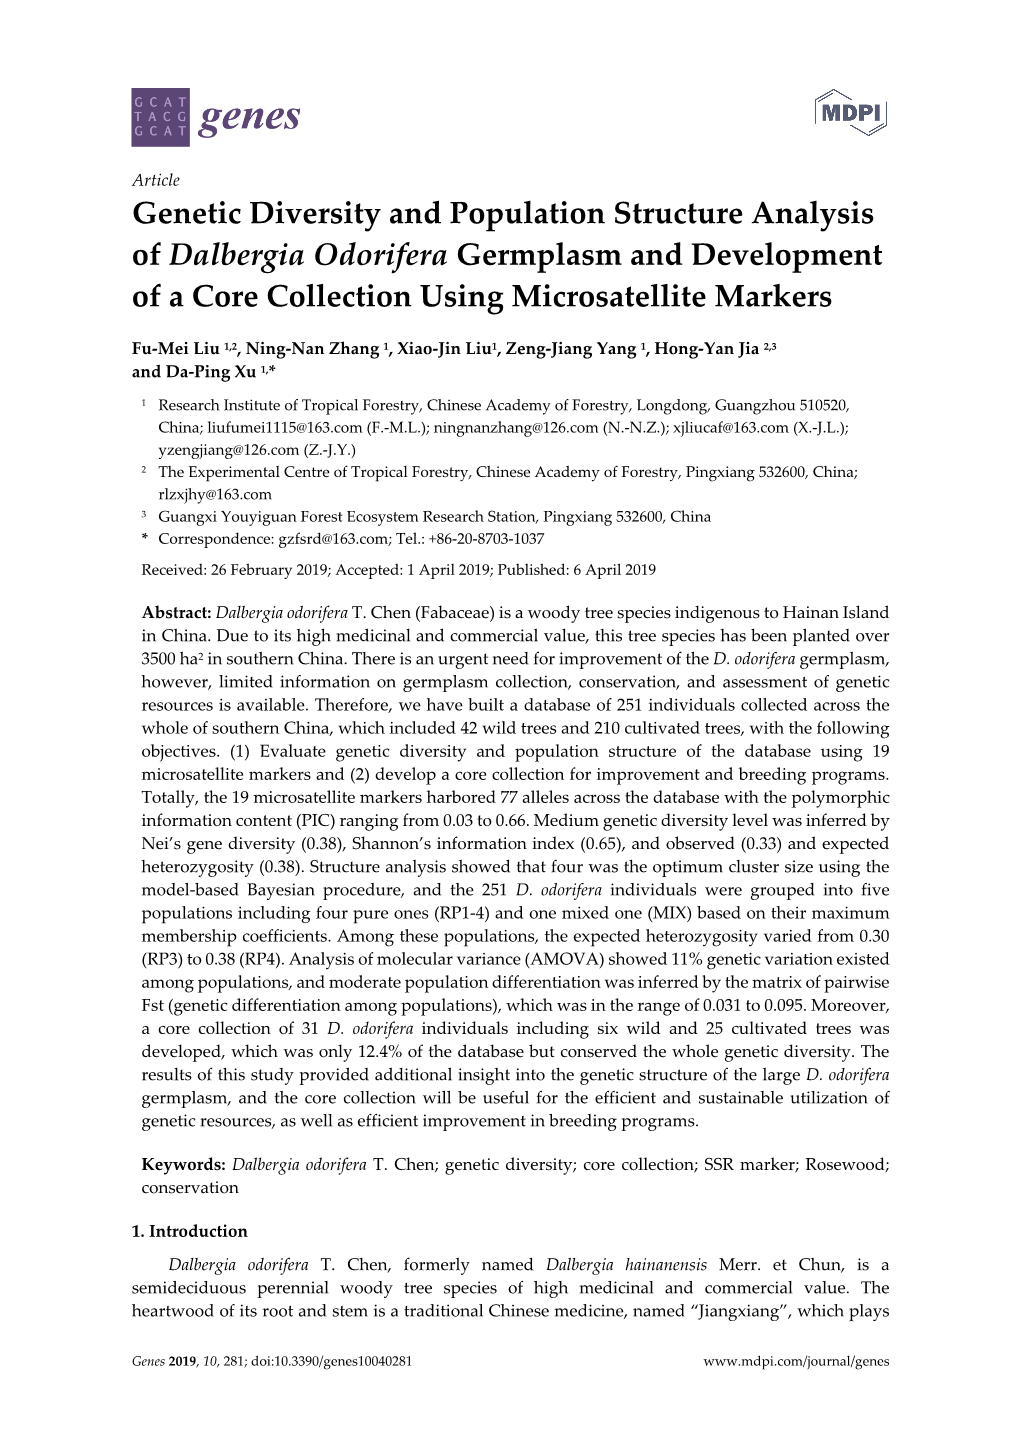 Genetic Diversity and Population Structure Analysis of Dalbergia Odorifera Germplasm and Development of a Core Collection Using Microsatellite Markers